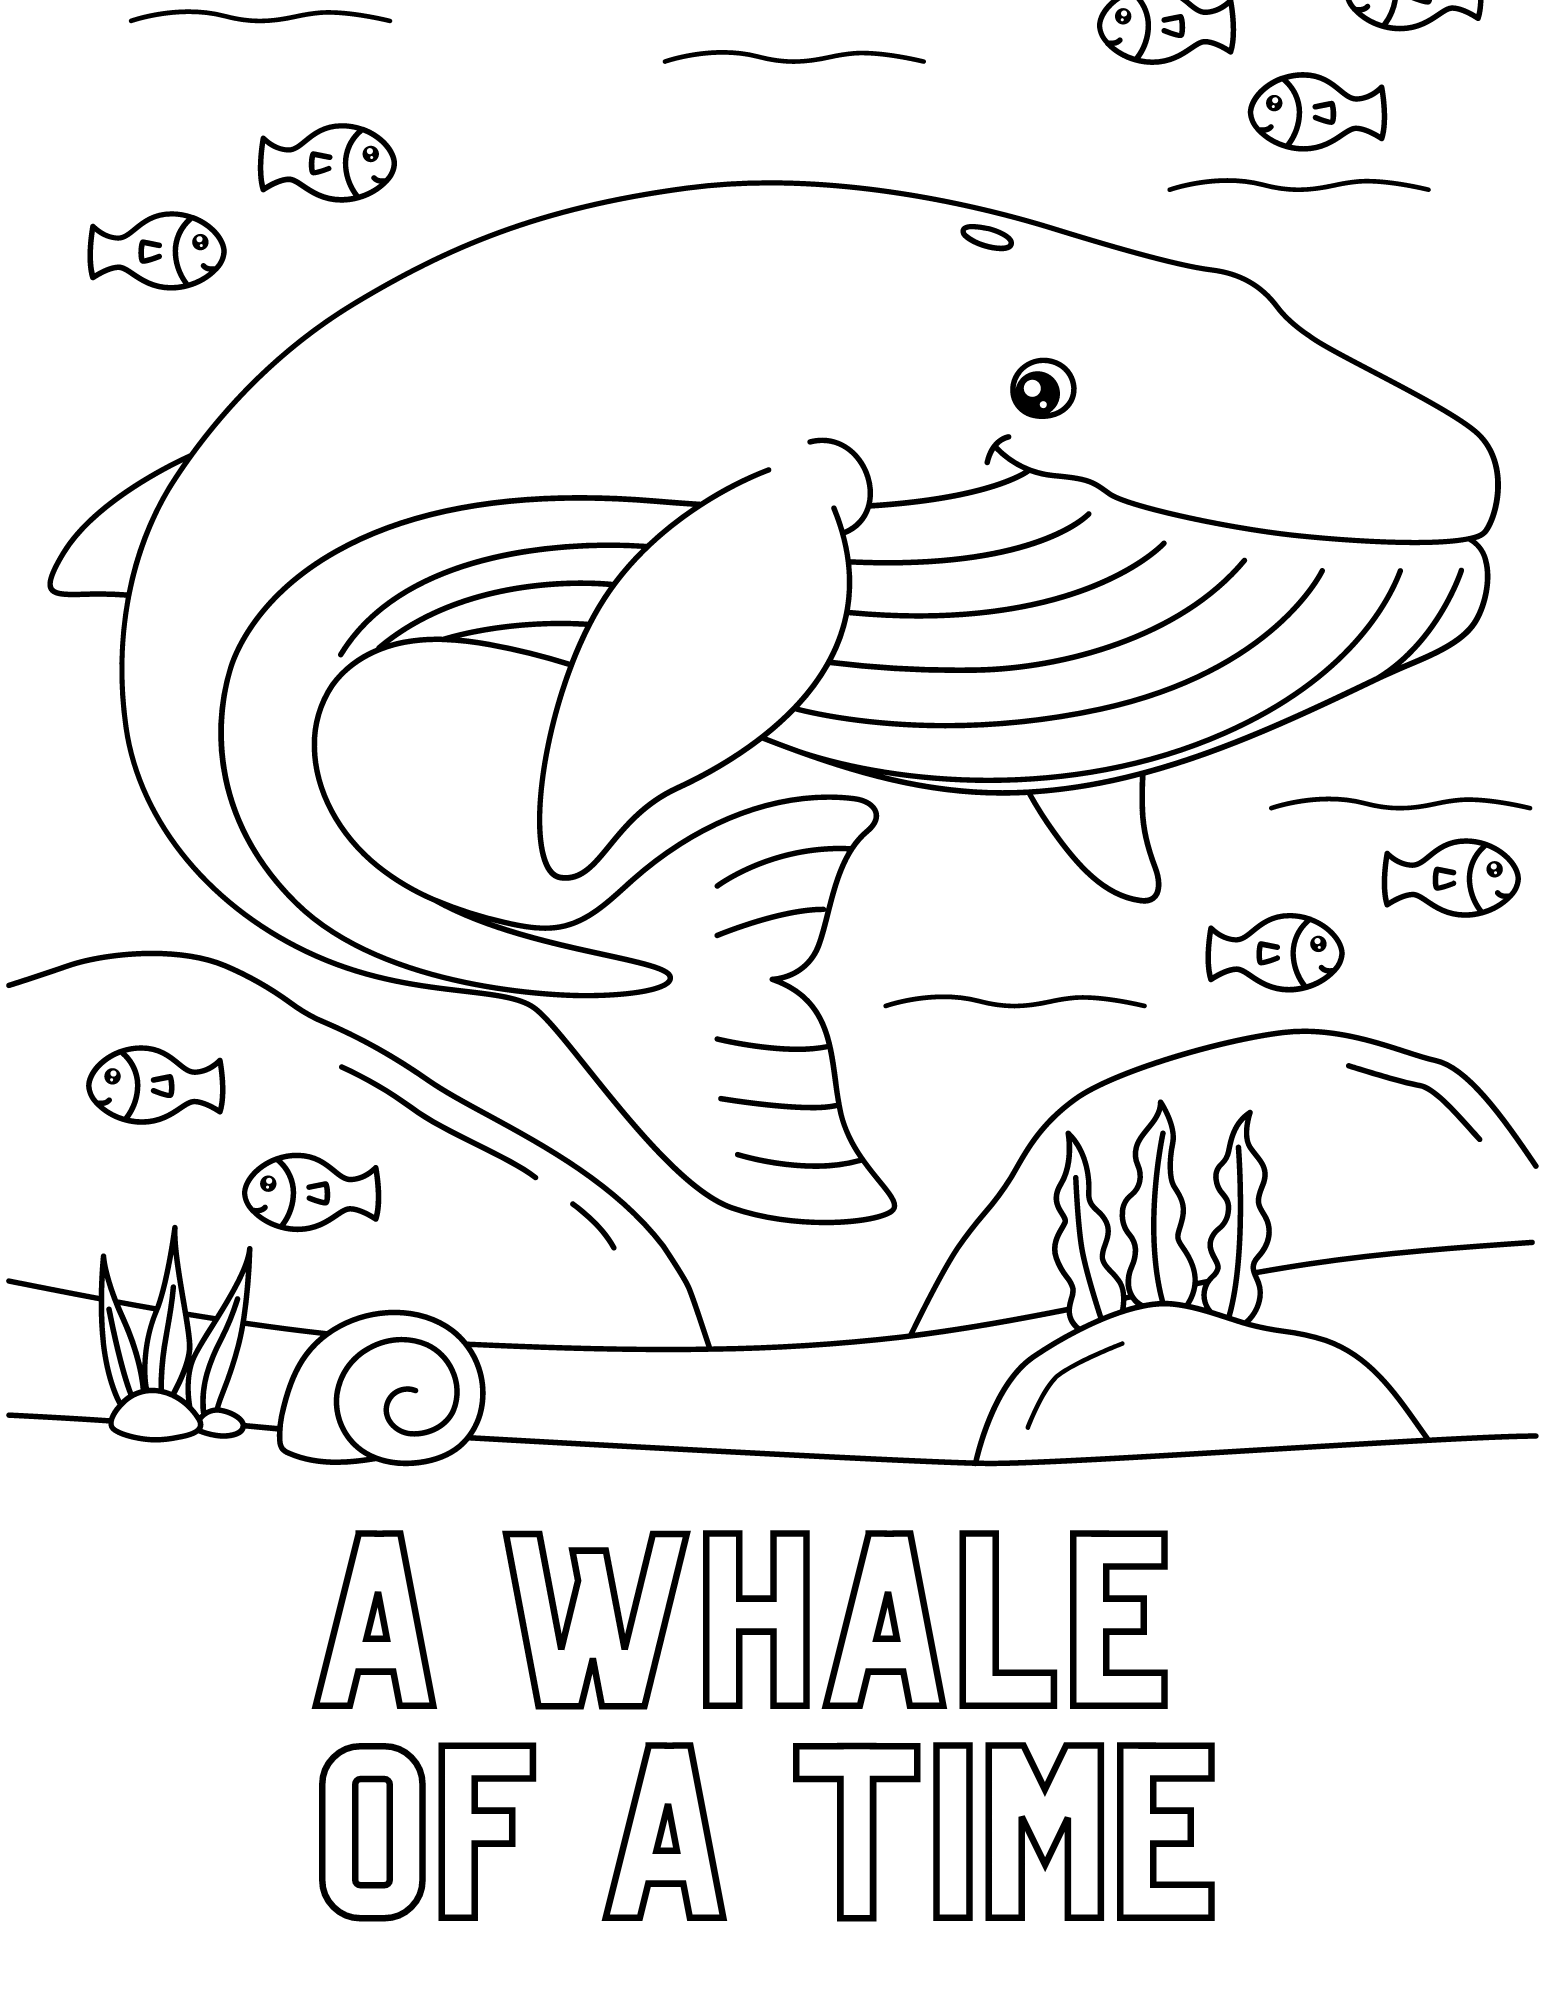 Have a whale of a time with these free whale coloring pages